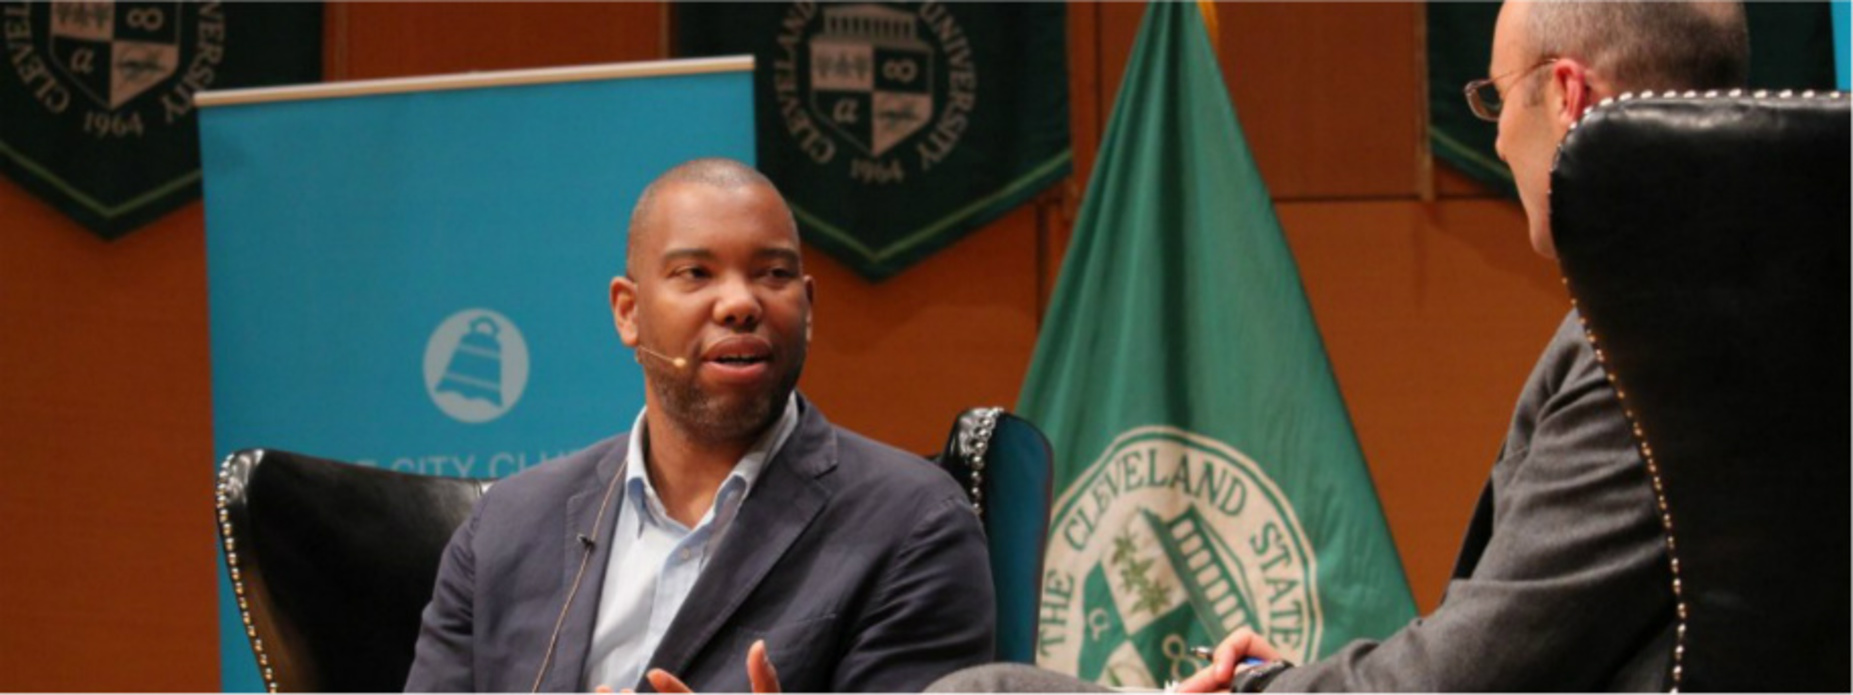 Ta-Nehisi Coates On Dismantling White Supremacy: “Any Definition Of Race Always Depends Upon Power”